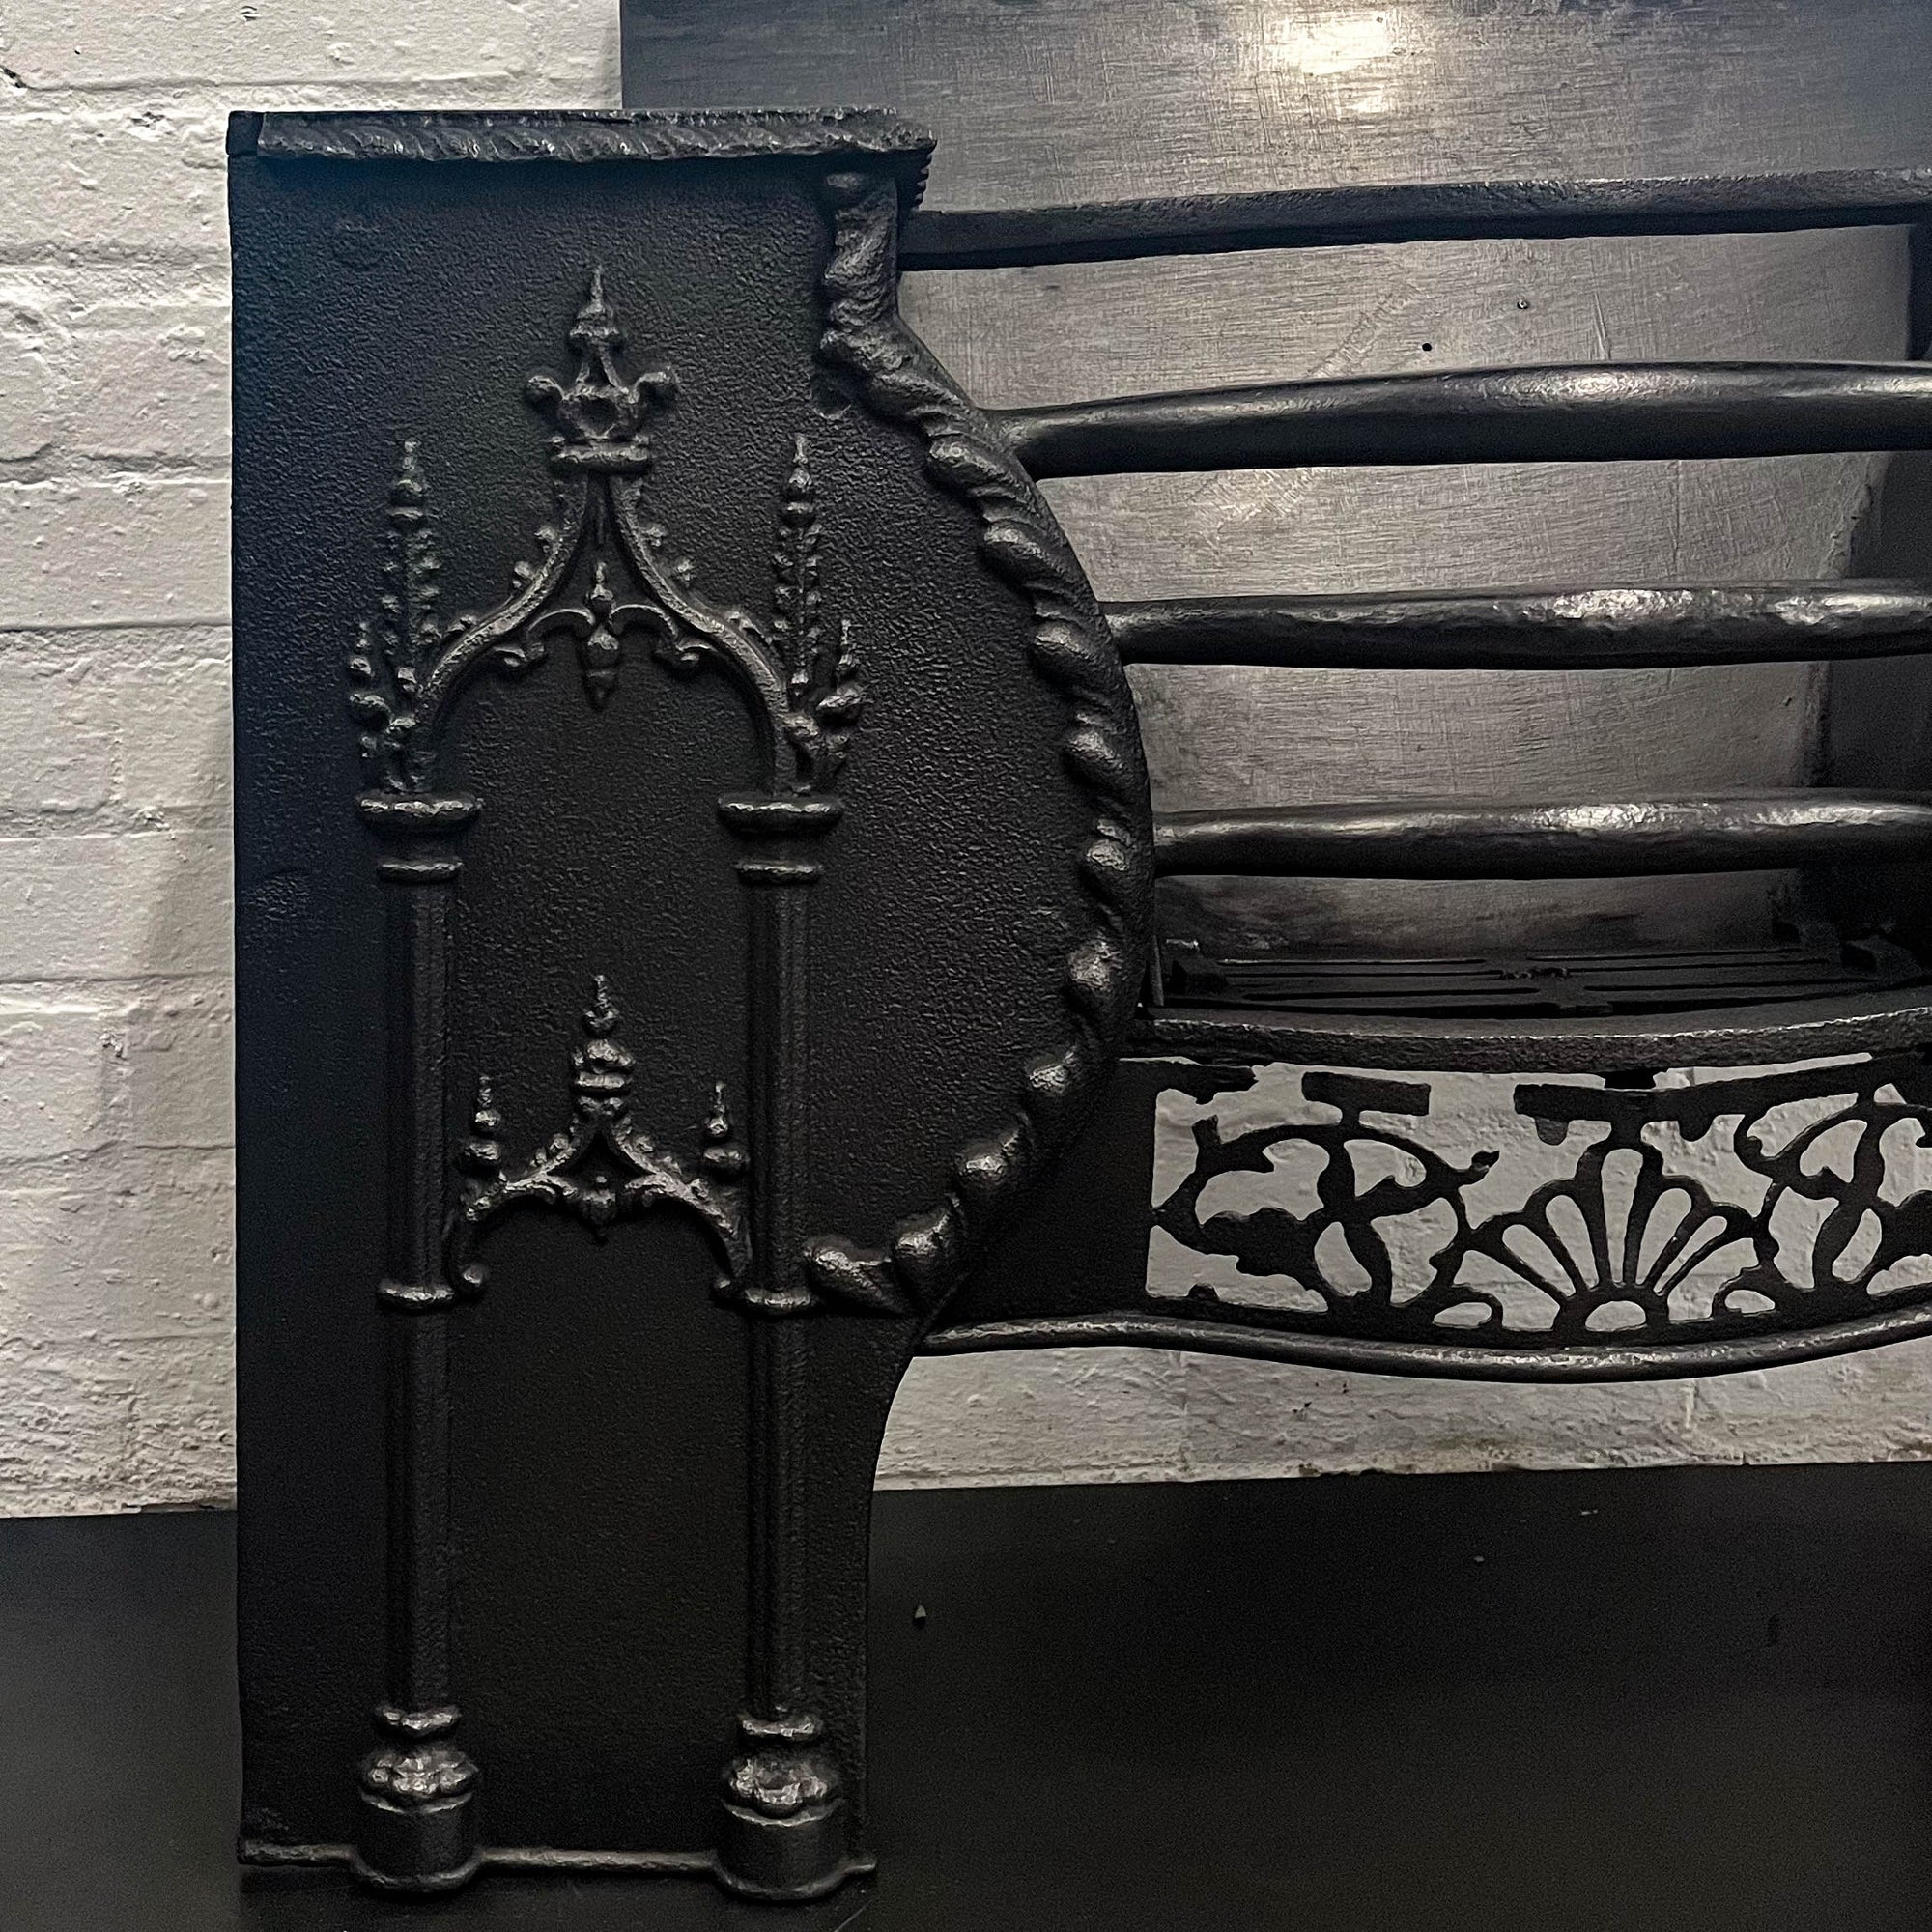 Mid 19th Century Victorian Gothic Revival Hob Grate | The Architectural Forum